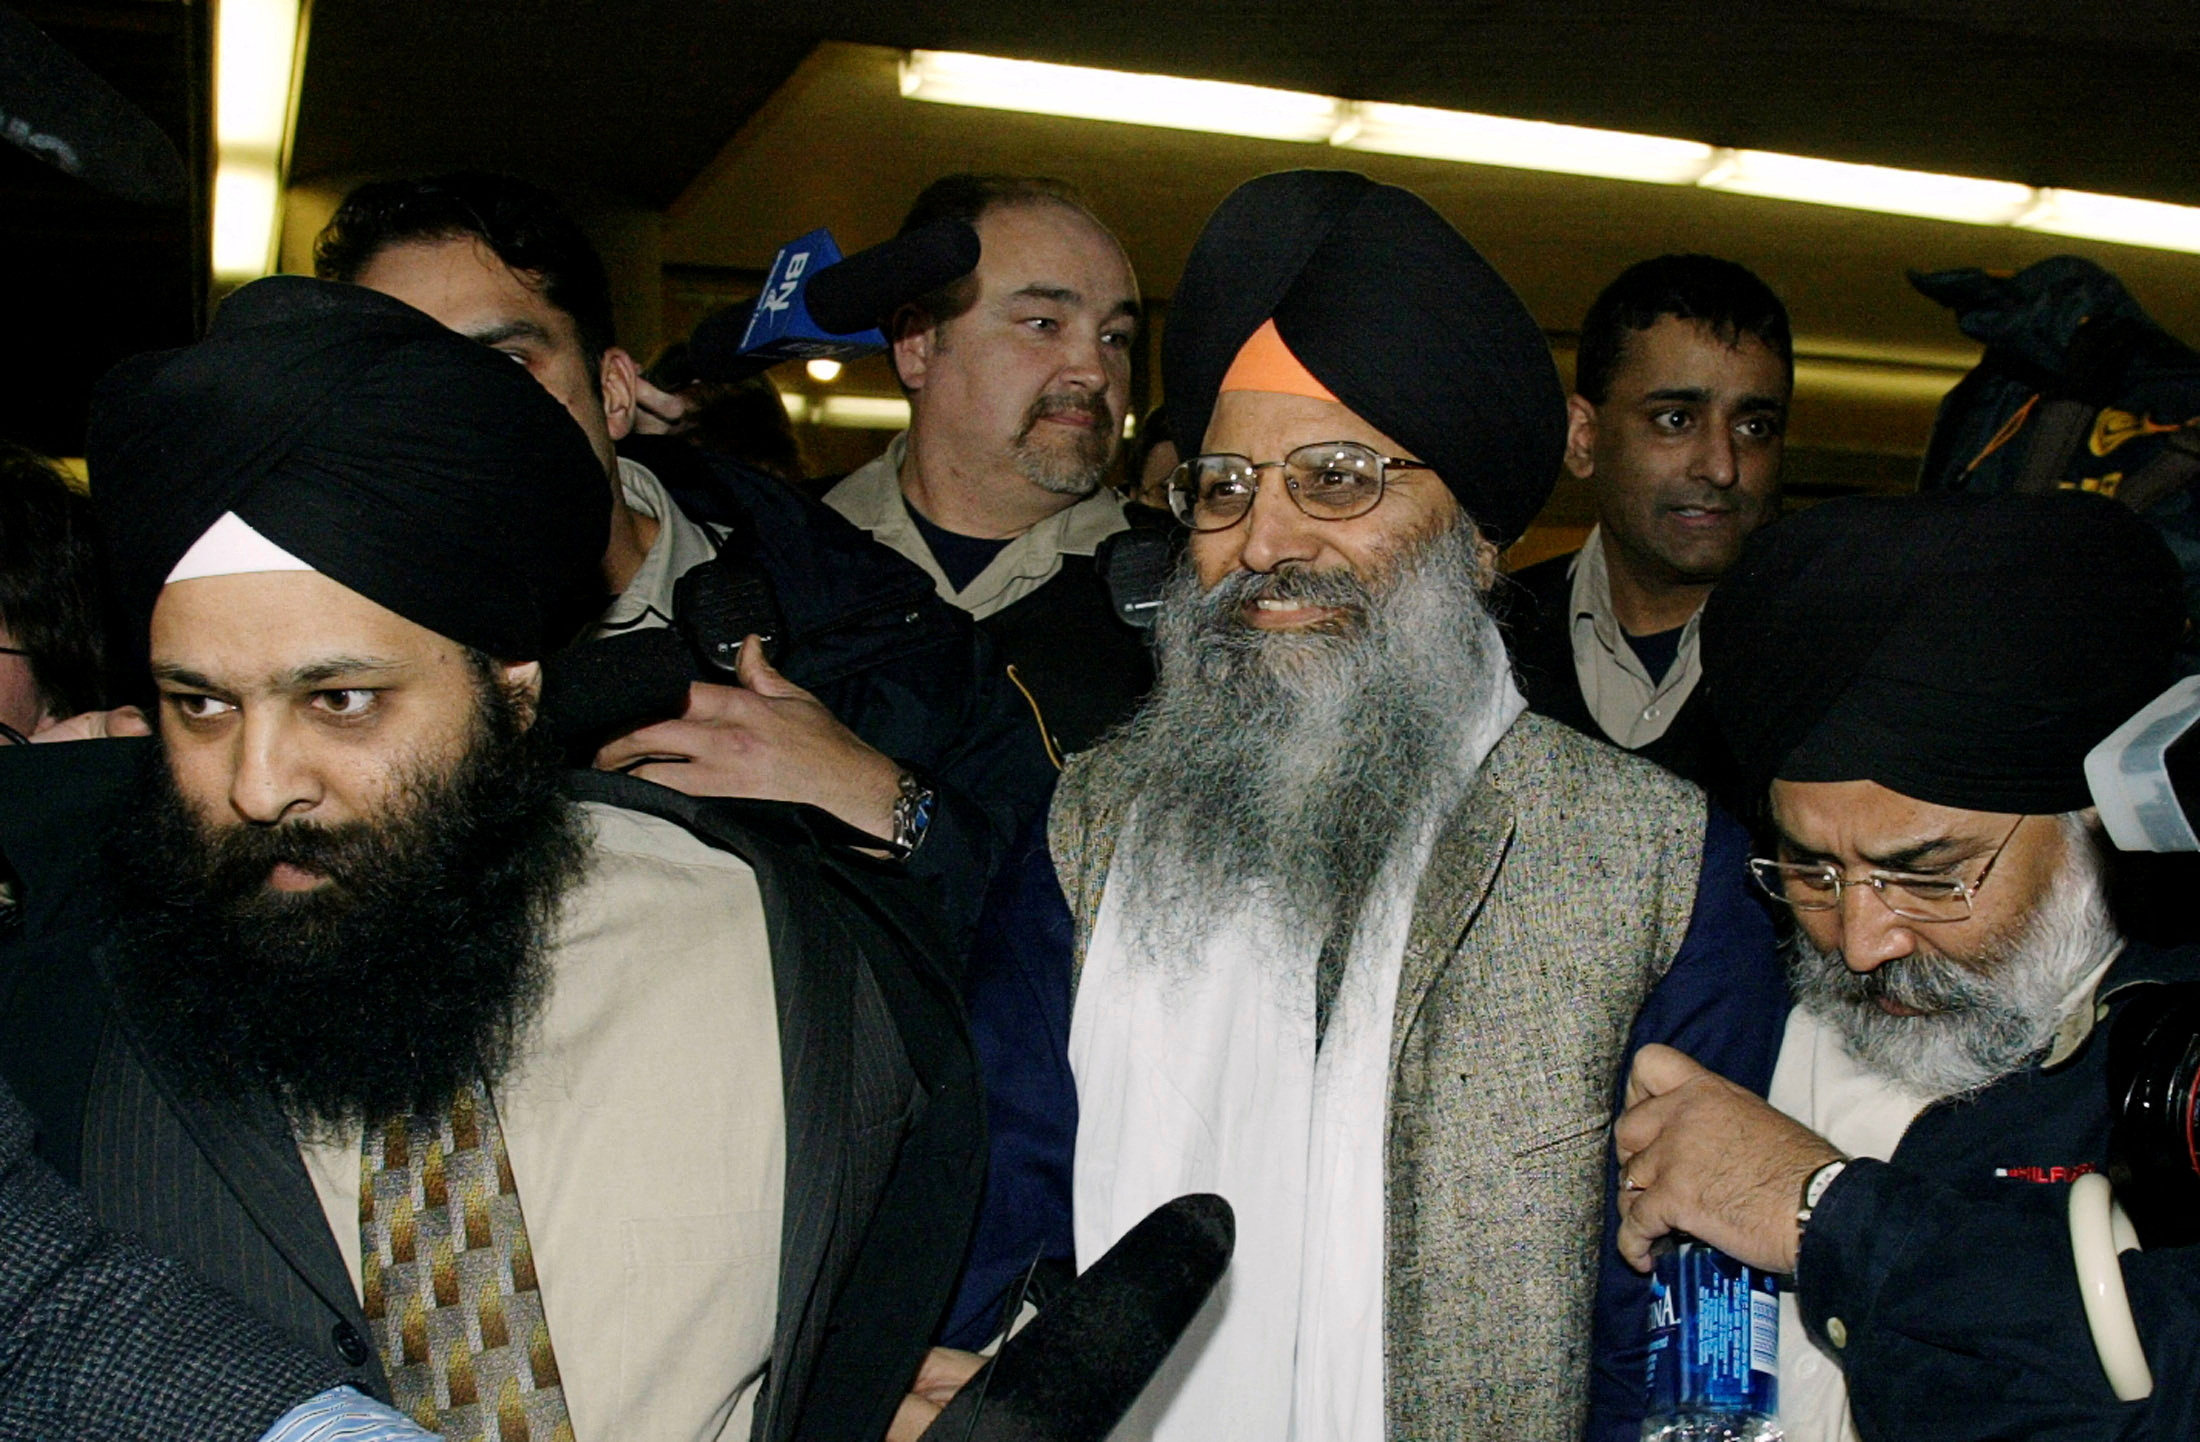 Ripudaman Singh Malik (centre) smiles as he leaves a Vancouver court in March 2005 after being found not guilty in the 1985 bombing of an Air India flight. Photo: Reuters